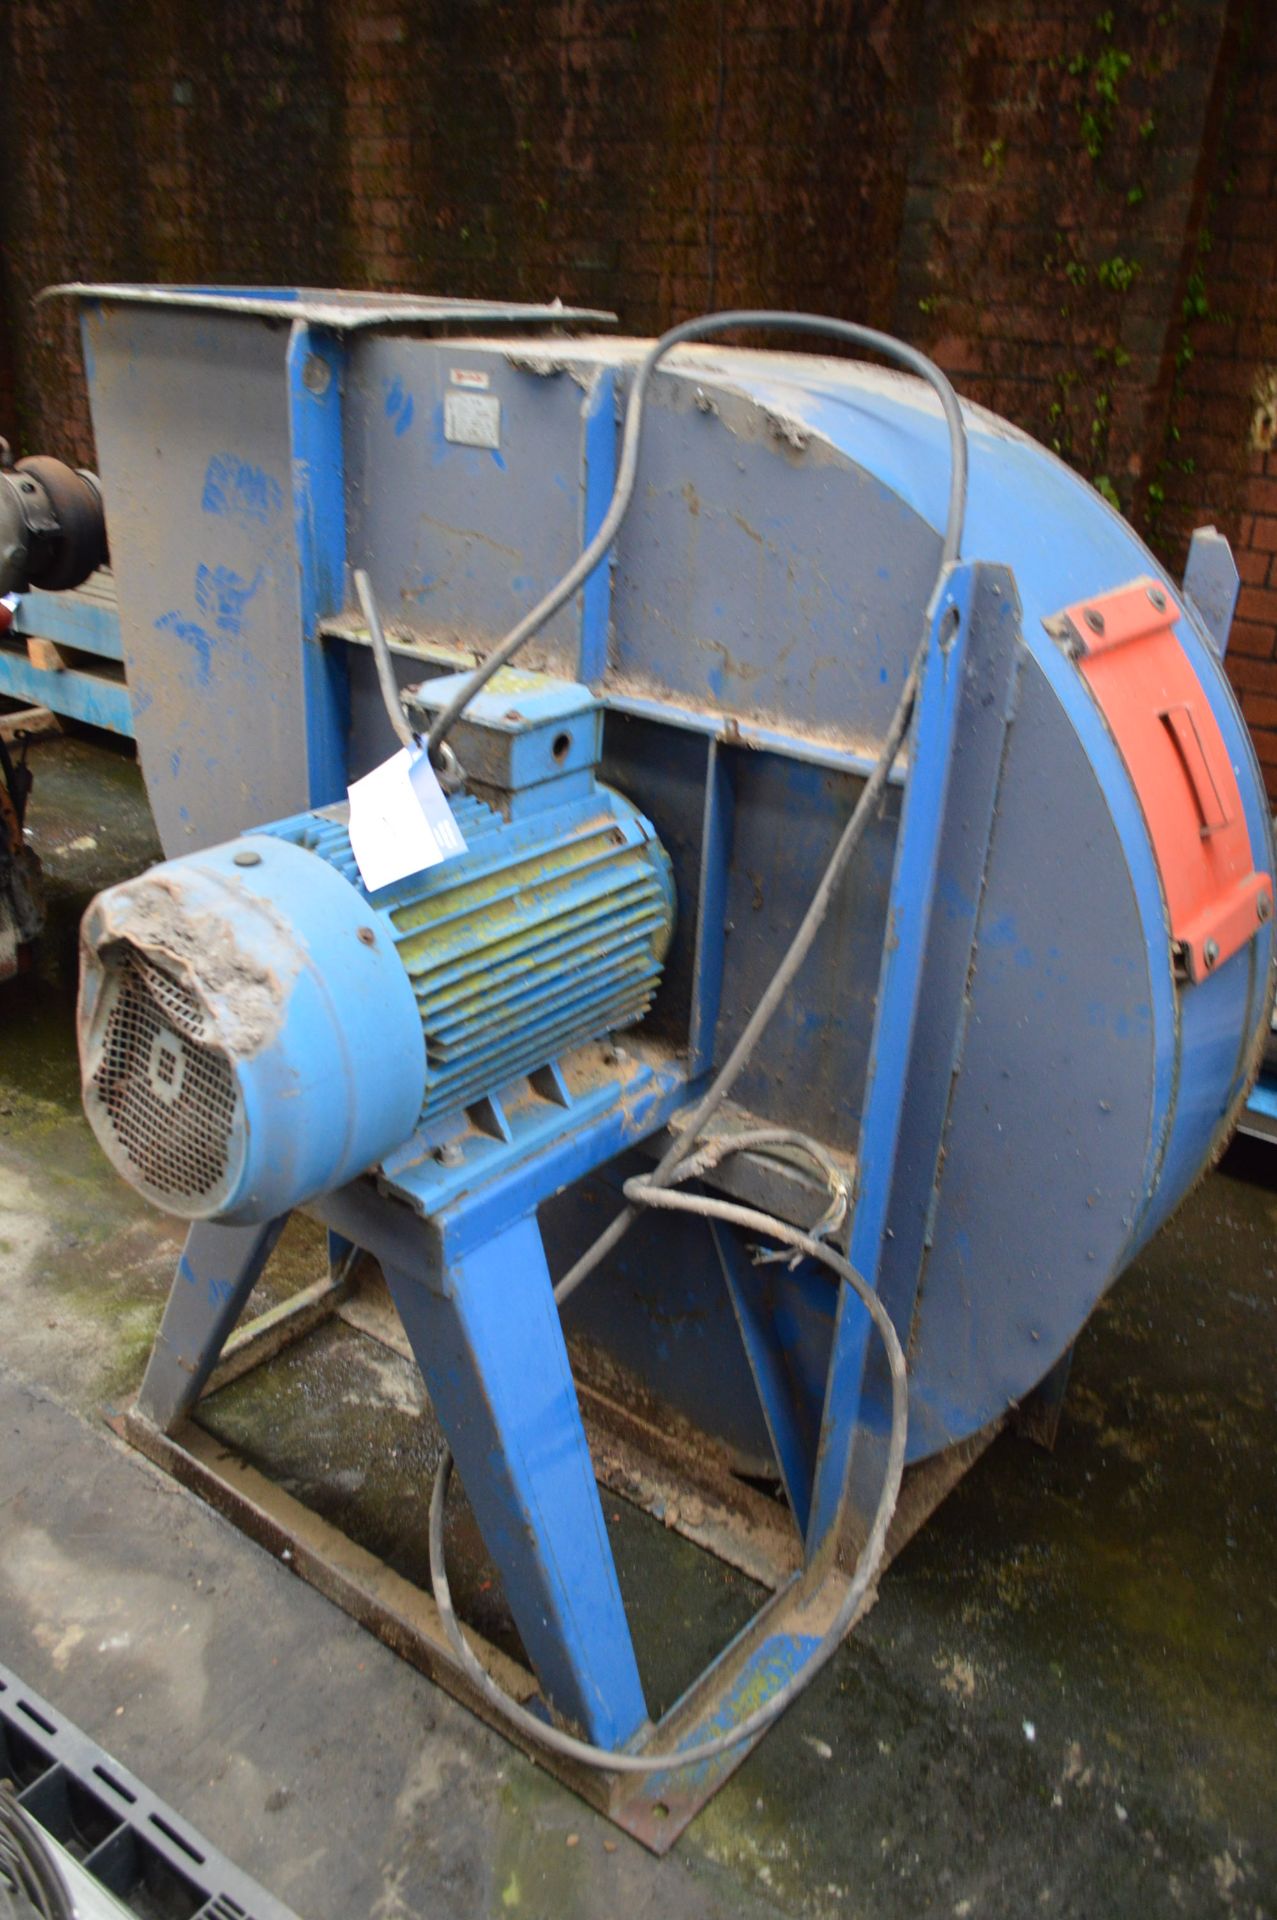 Imas GR 900 Steel Cased Centrifugal Fan, serial no. 60812065, with 22kW electric motor